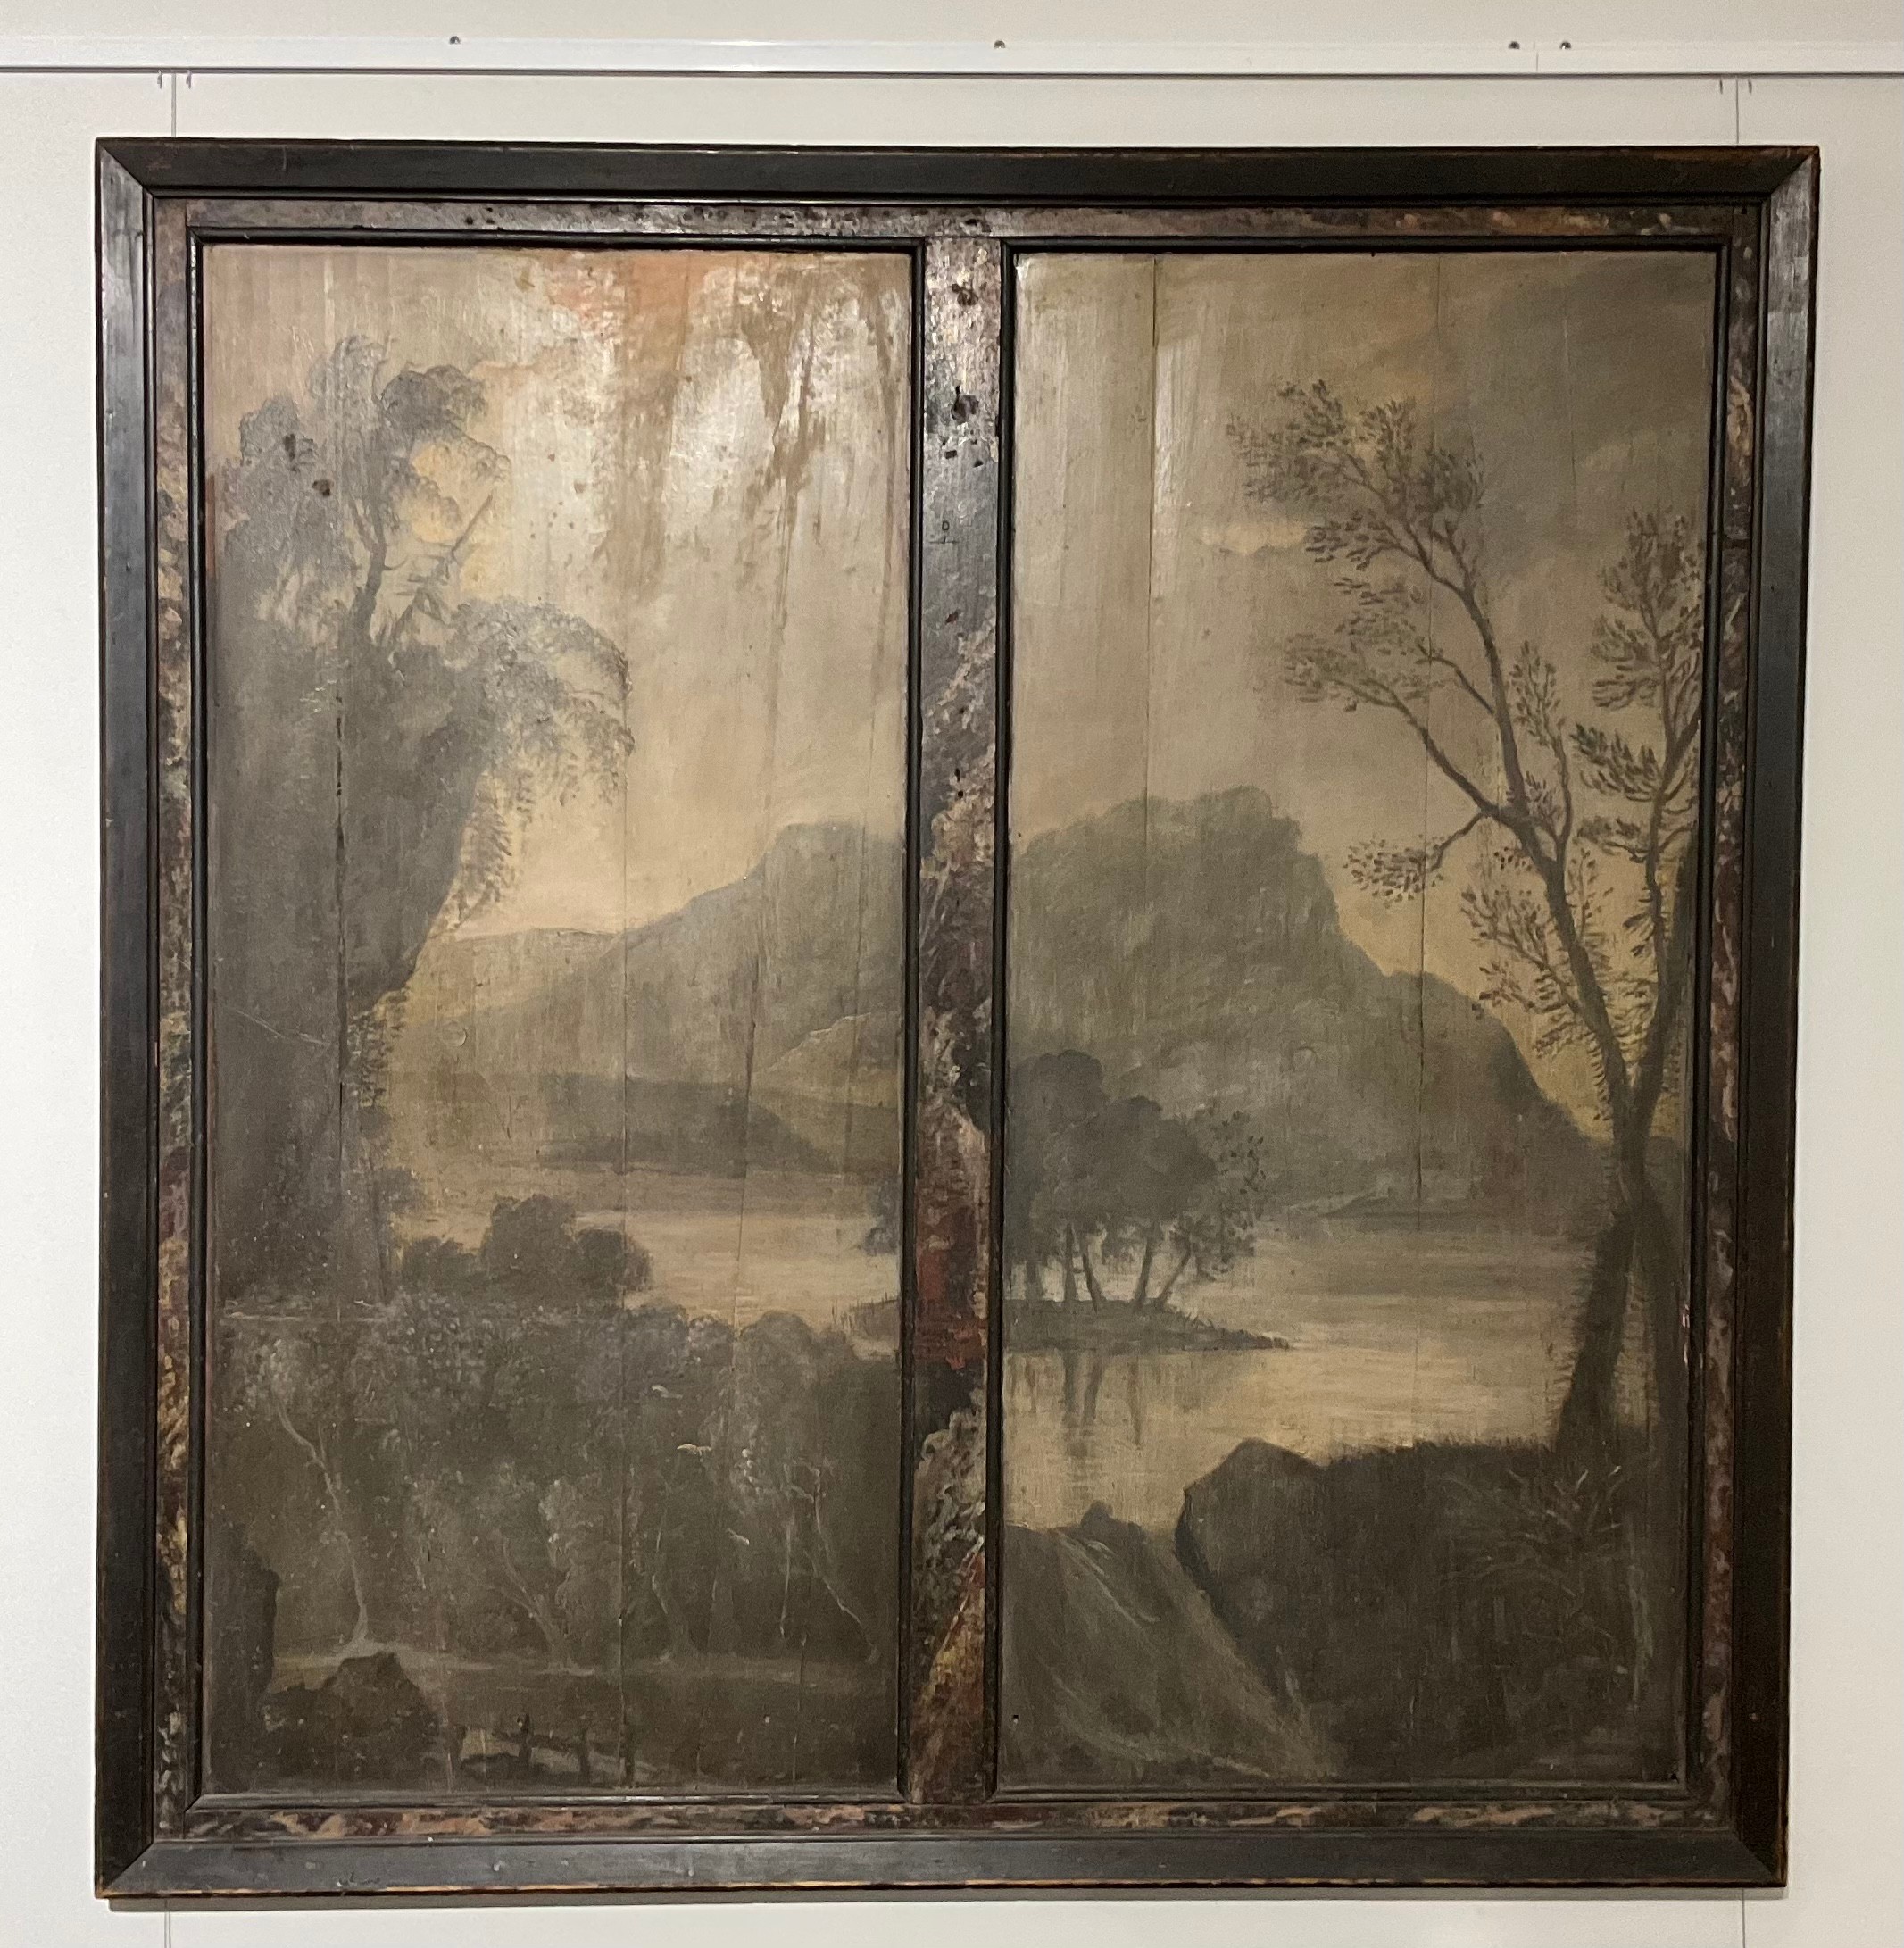 A 19th Century double painted panel of Japanese vista, landscape, mountains, lake, island and trees.